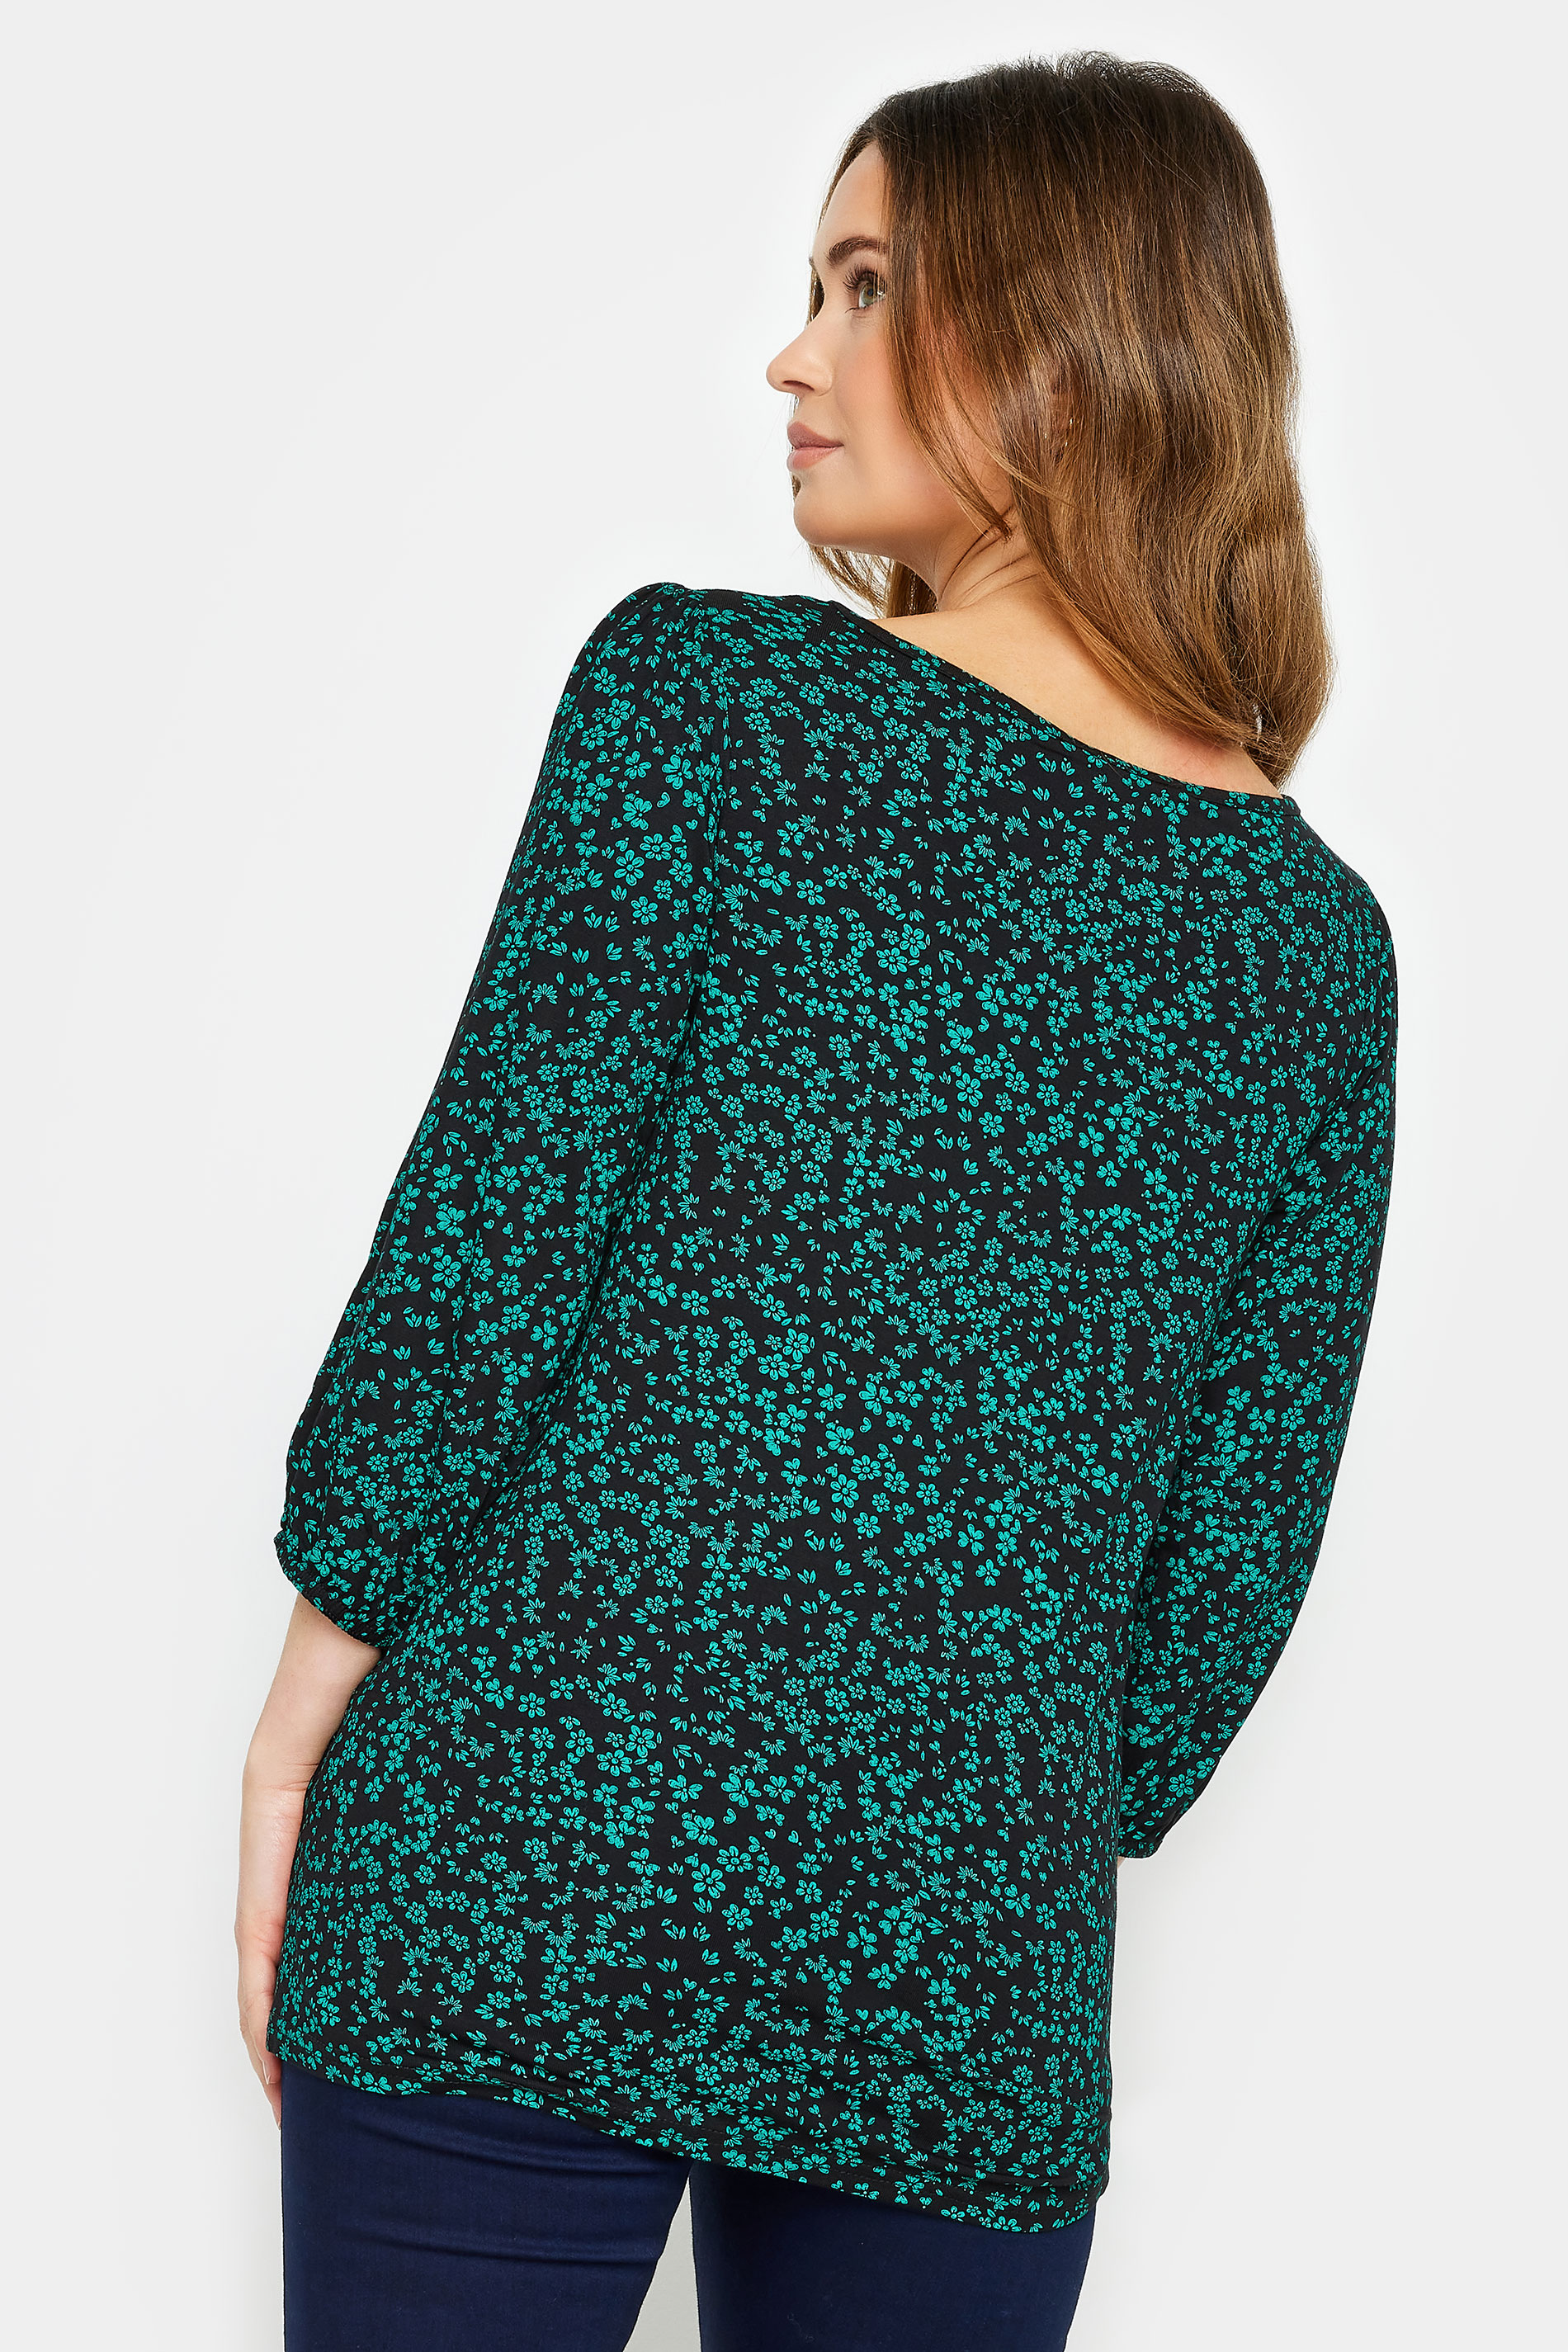 M&Co Petite Green Ditsy Floral Print Top | M&Co 2